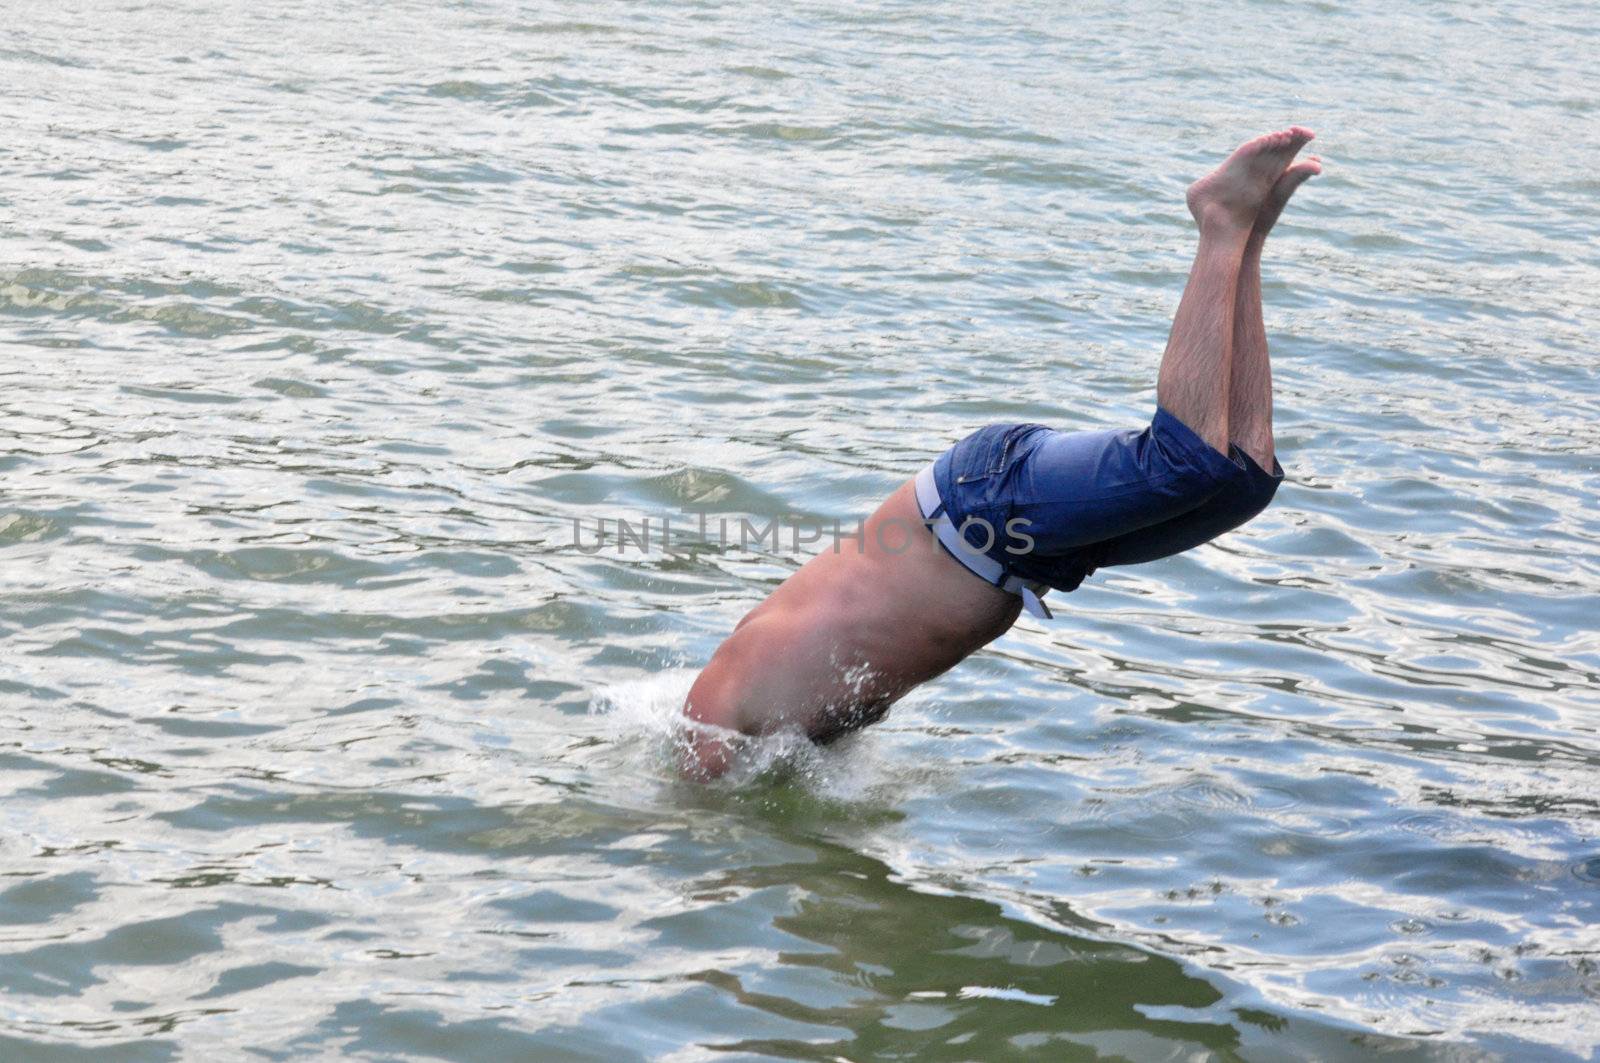 young man plunging into water in a summer day